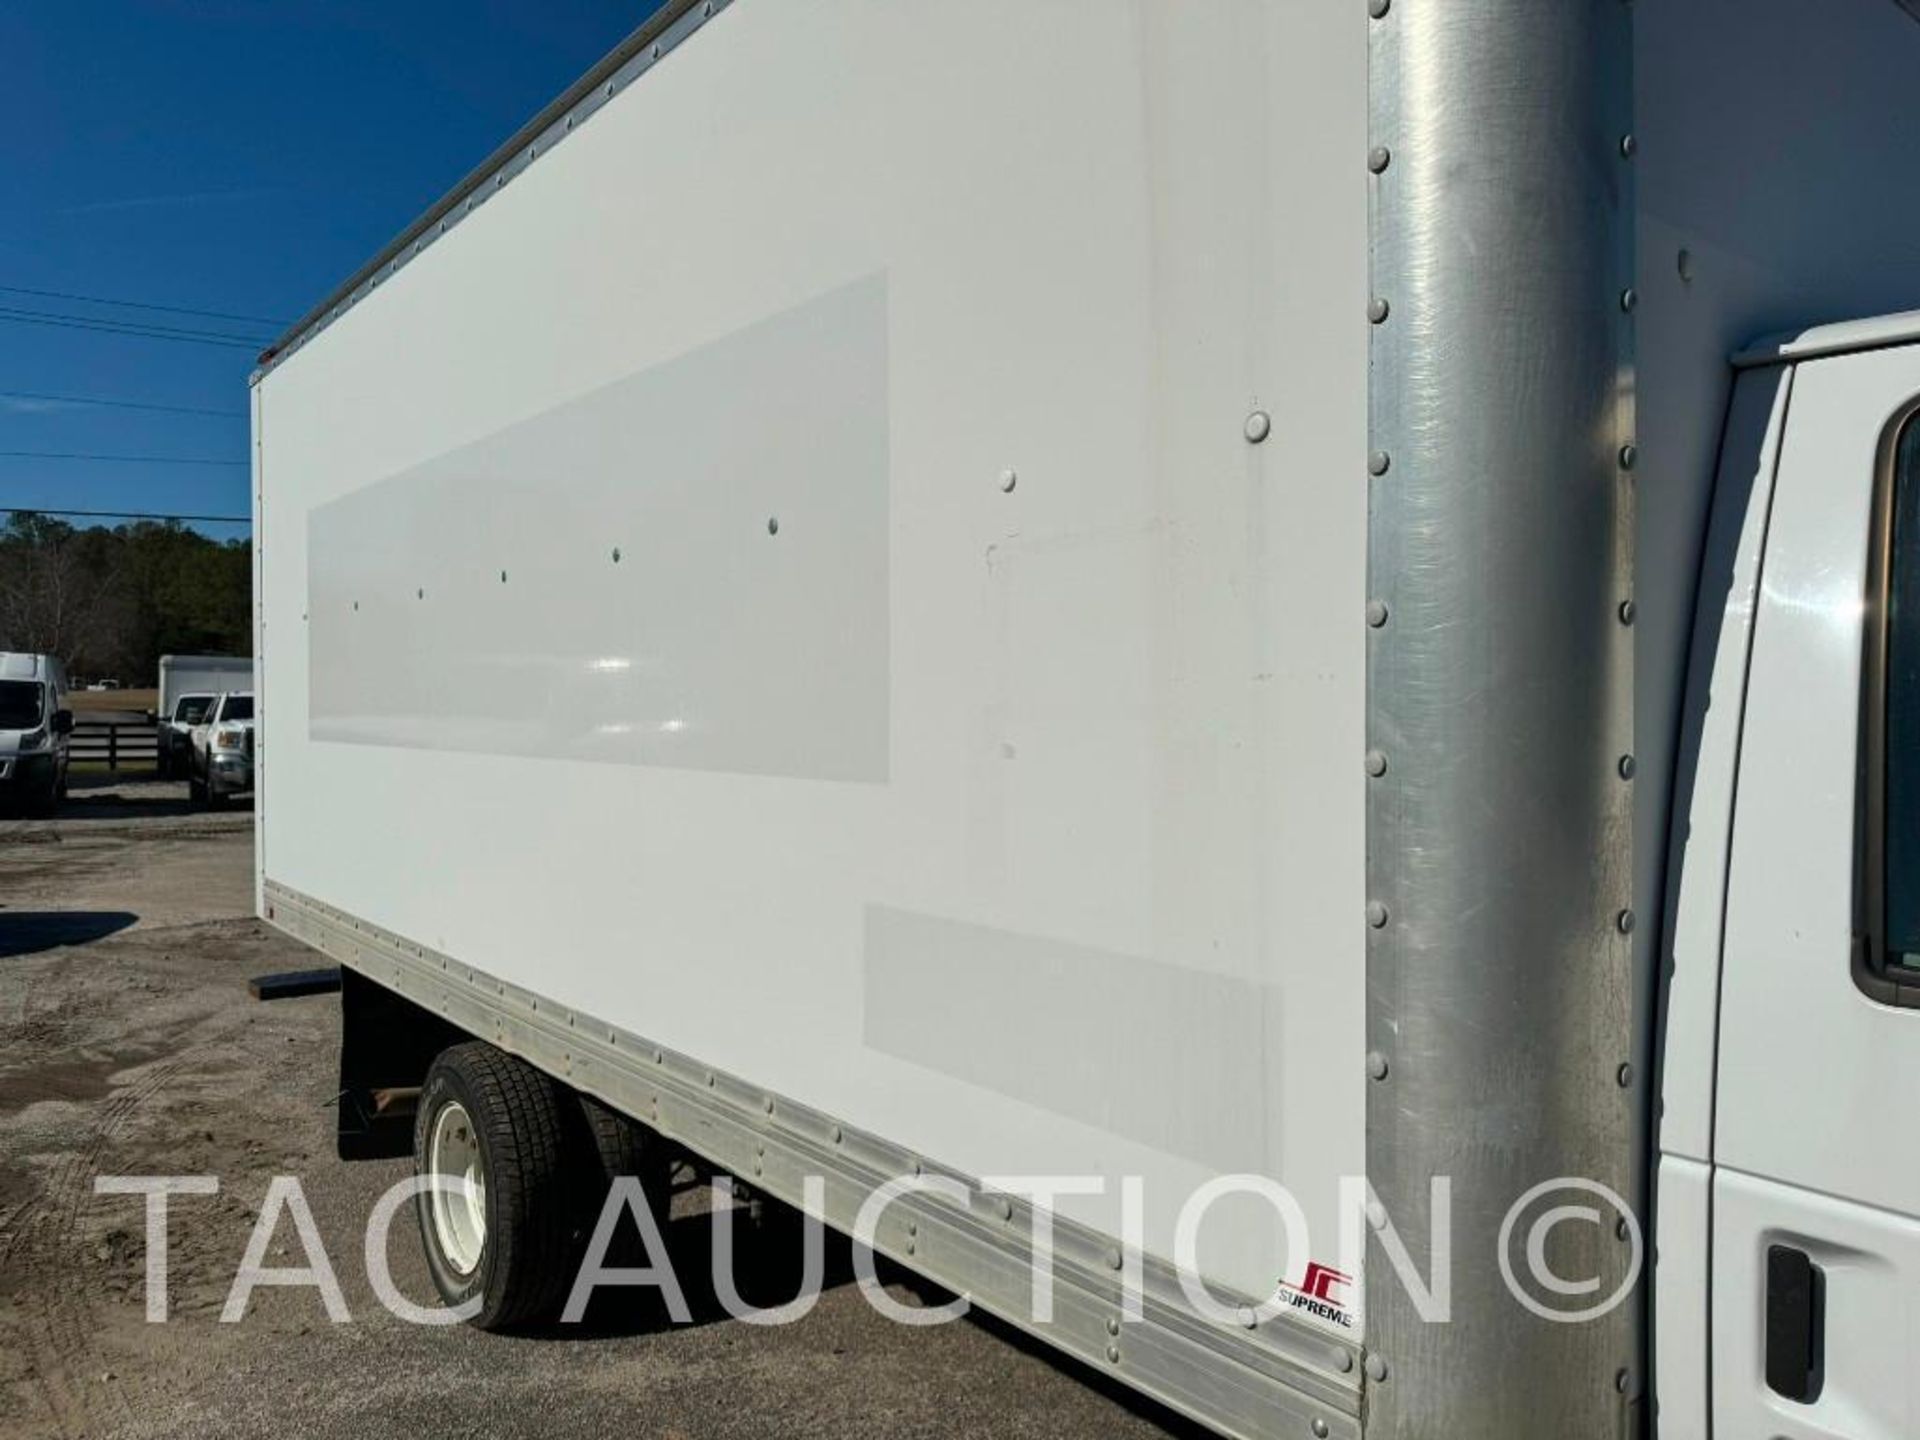 2014 Ford E-350 16ft Box Truck - Image 59 of 93